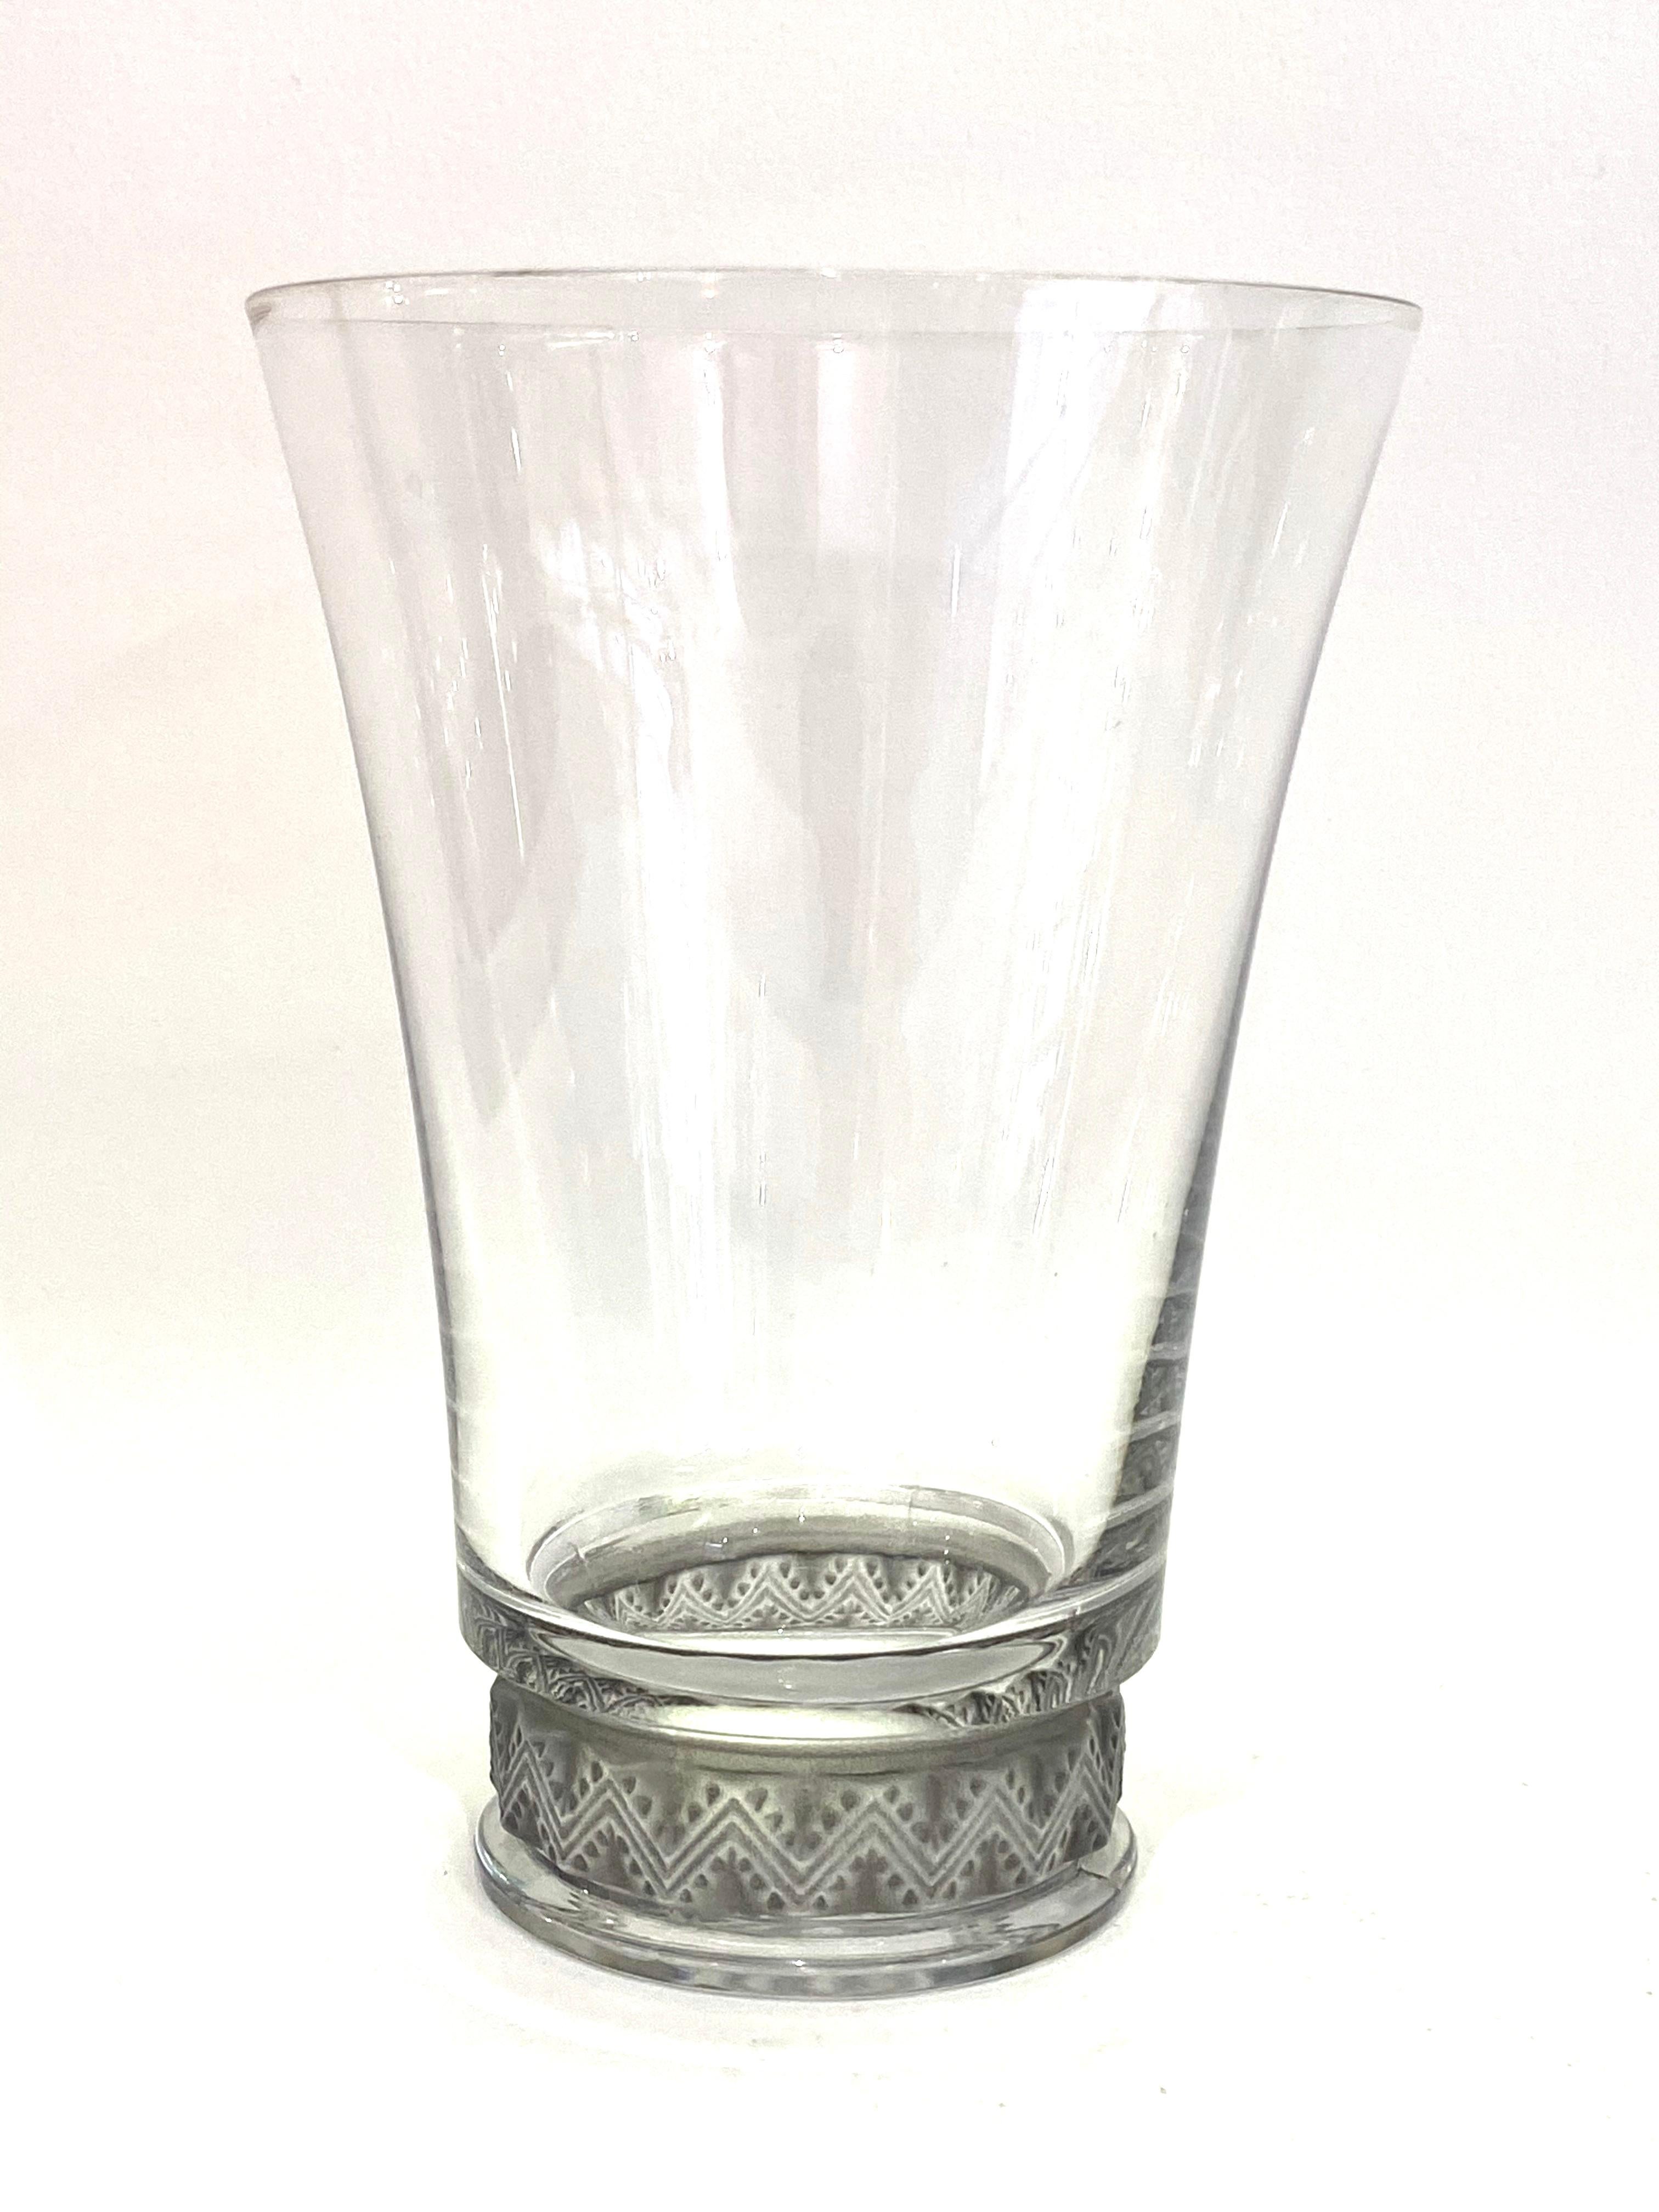 Set of 8 (eight) drinking glasses made by René Lalique in 1942. Model is named 